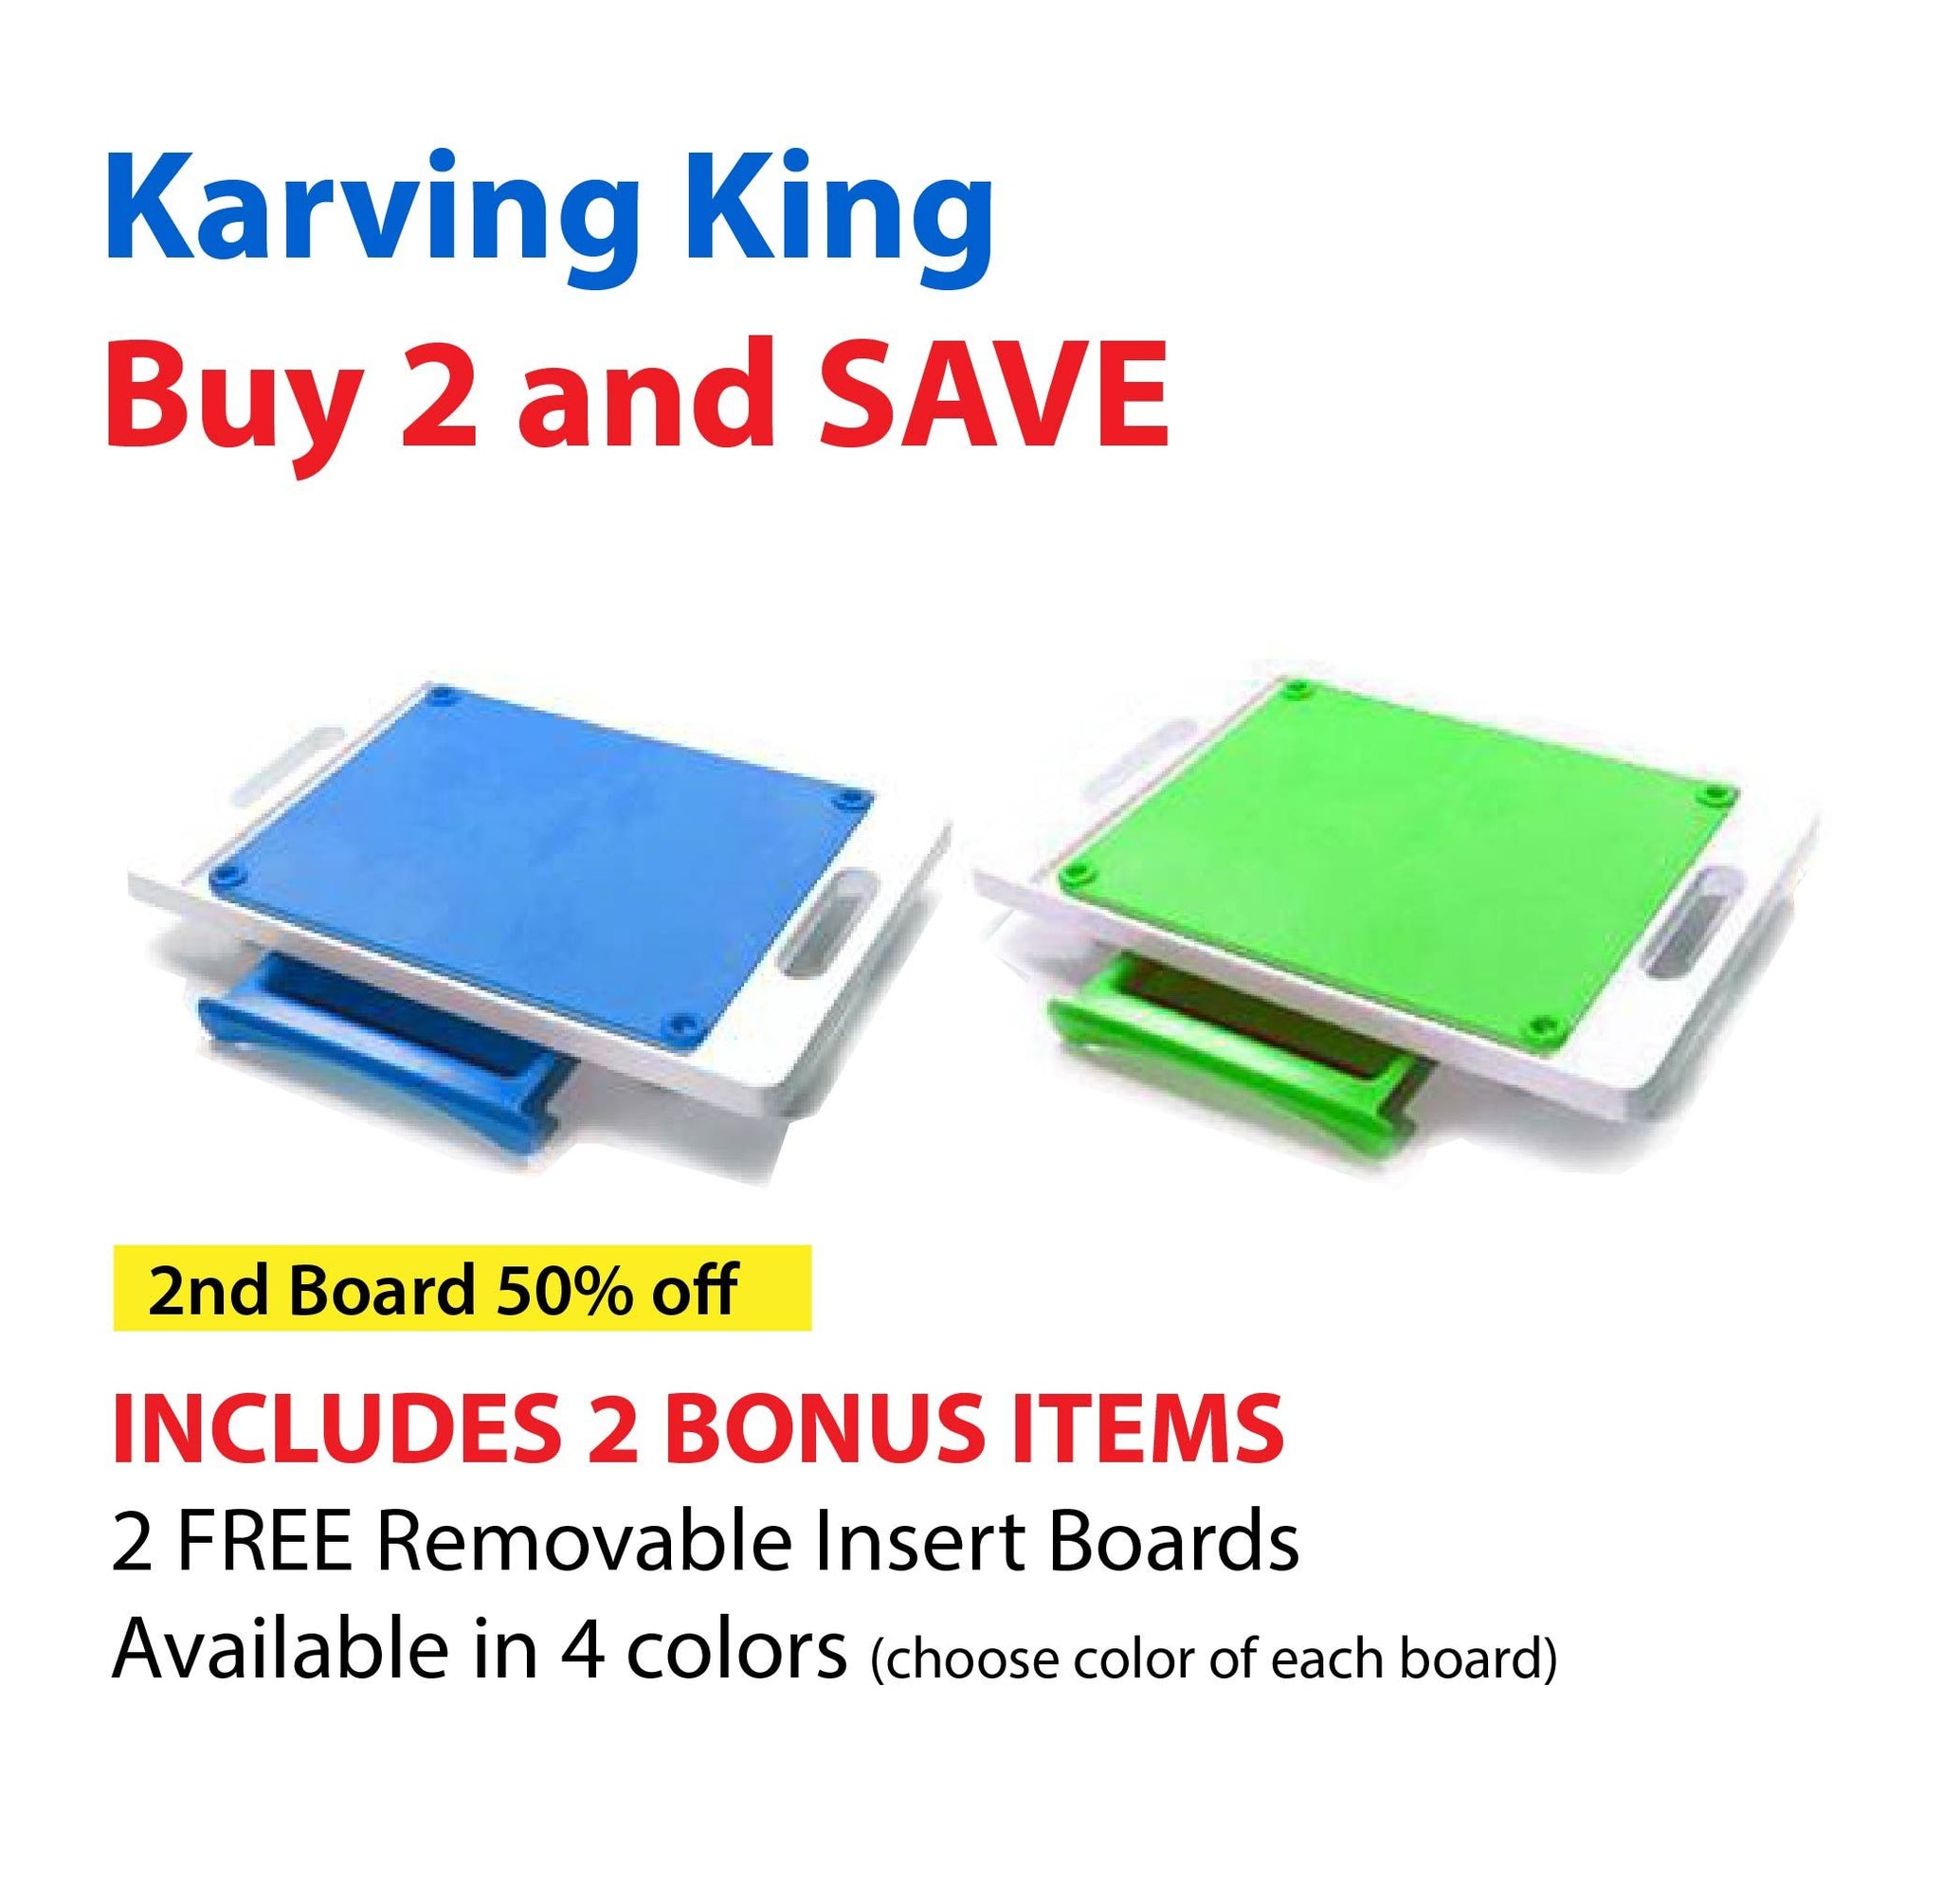 Set of 2 Dripless Cutting Boards 2 in 1 System